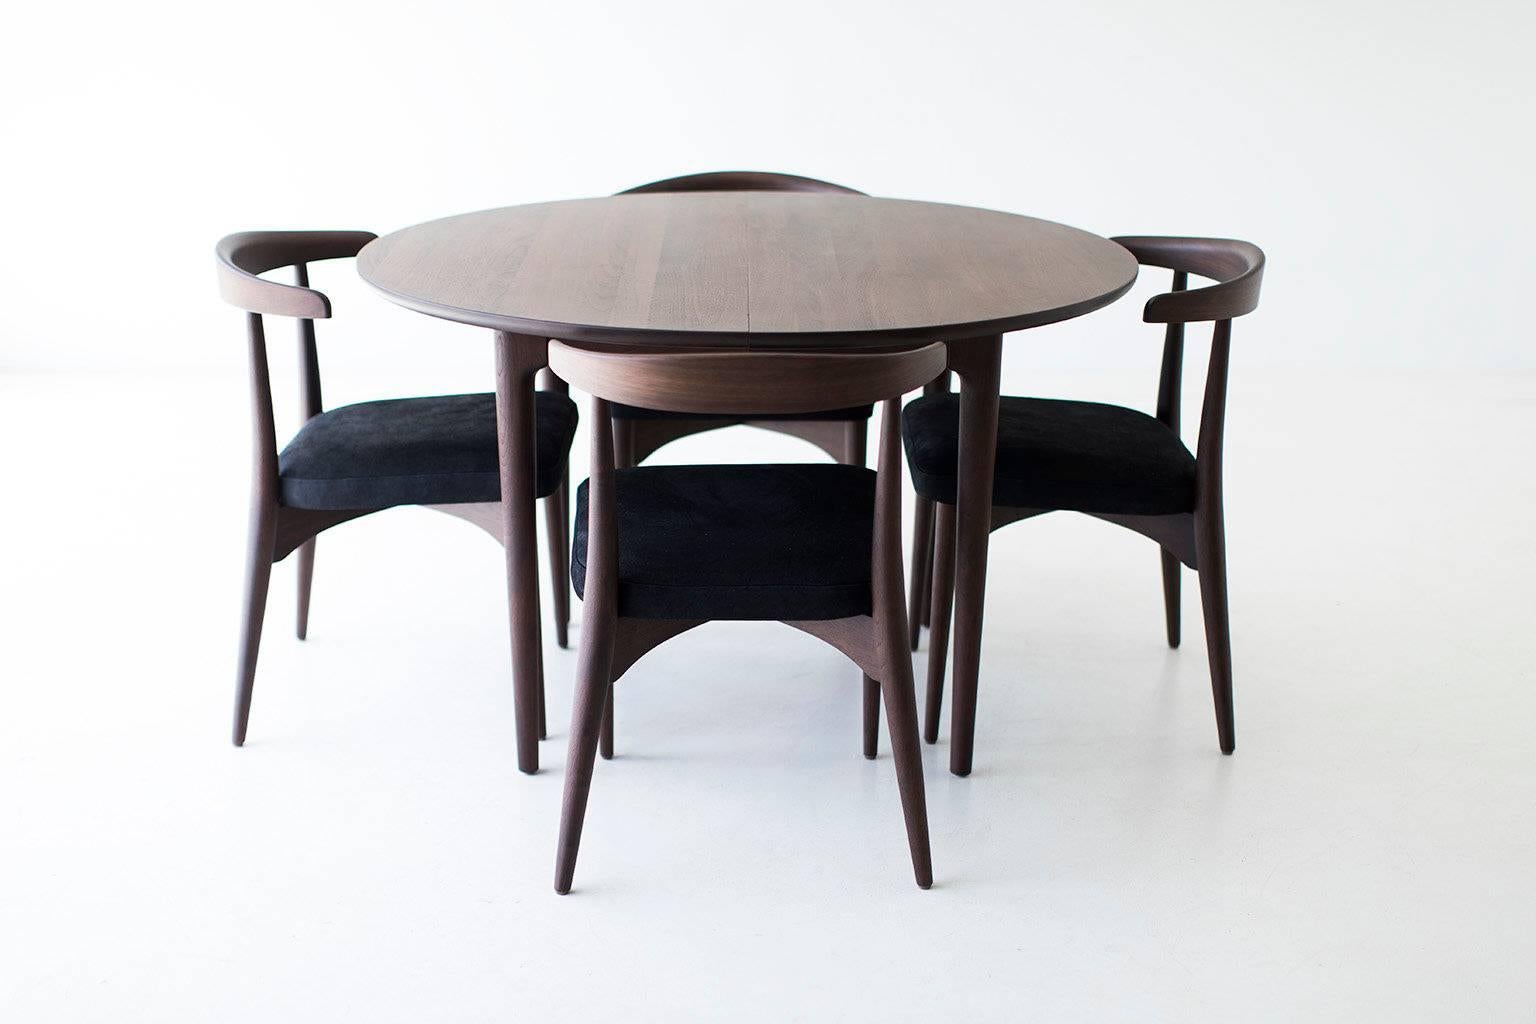 Designer: Lawrence Peabody

Manufacturer: Craft Associates Furniture
Period/Model: Mid-Century Modern
Specs: Solid walnut

This Lawrence Peabody dining table is expertly handcrafted from solid walnut with a matte commercial-grade finish. Each